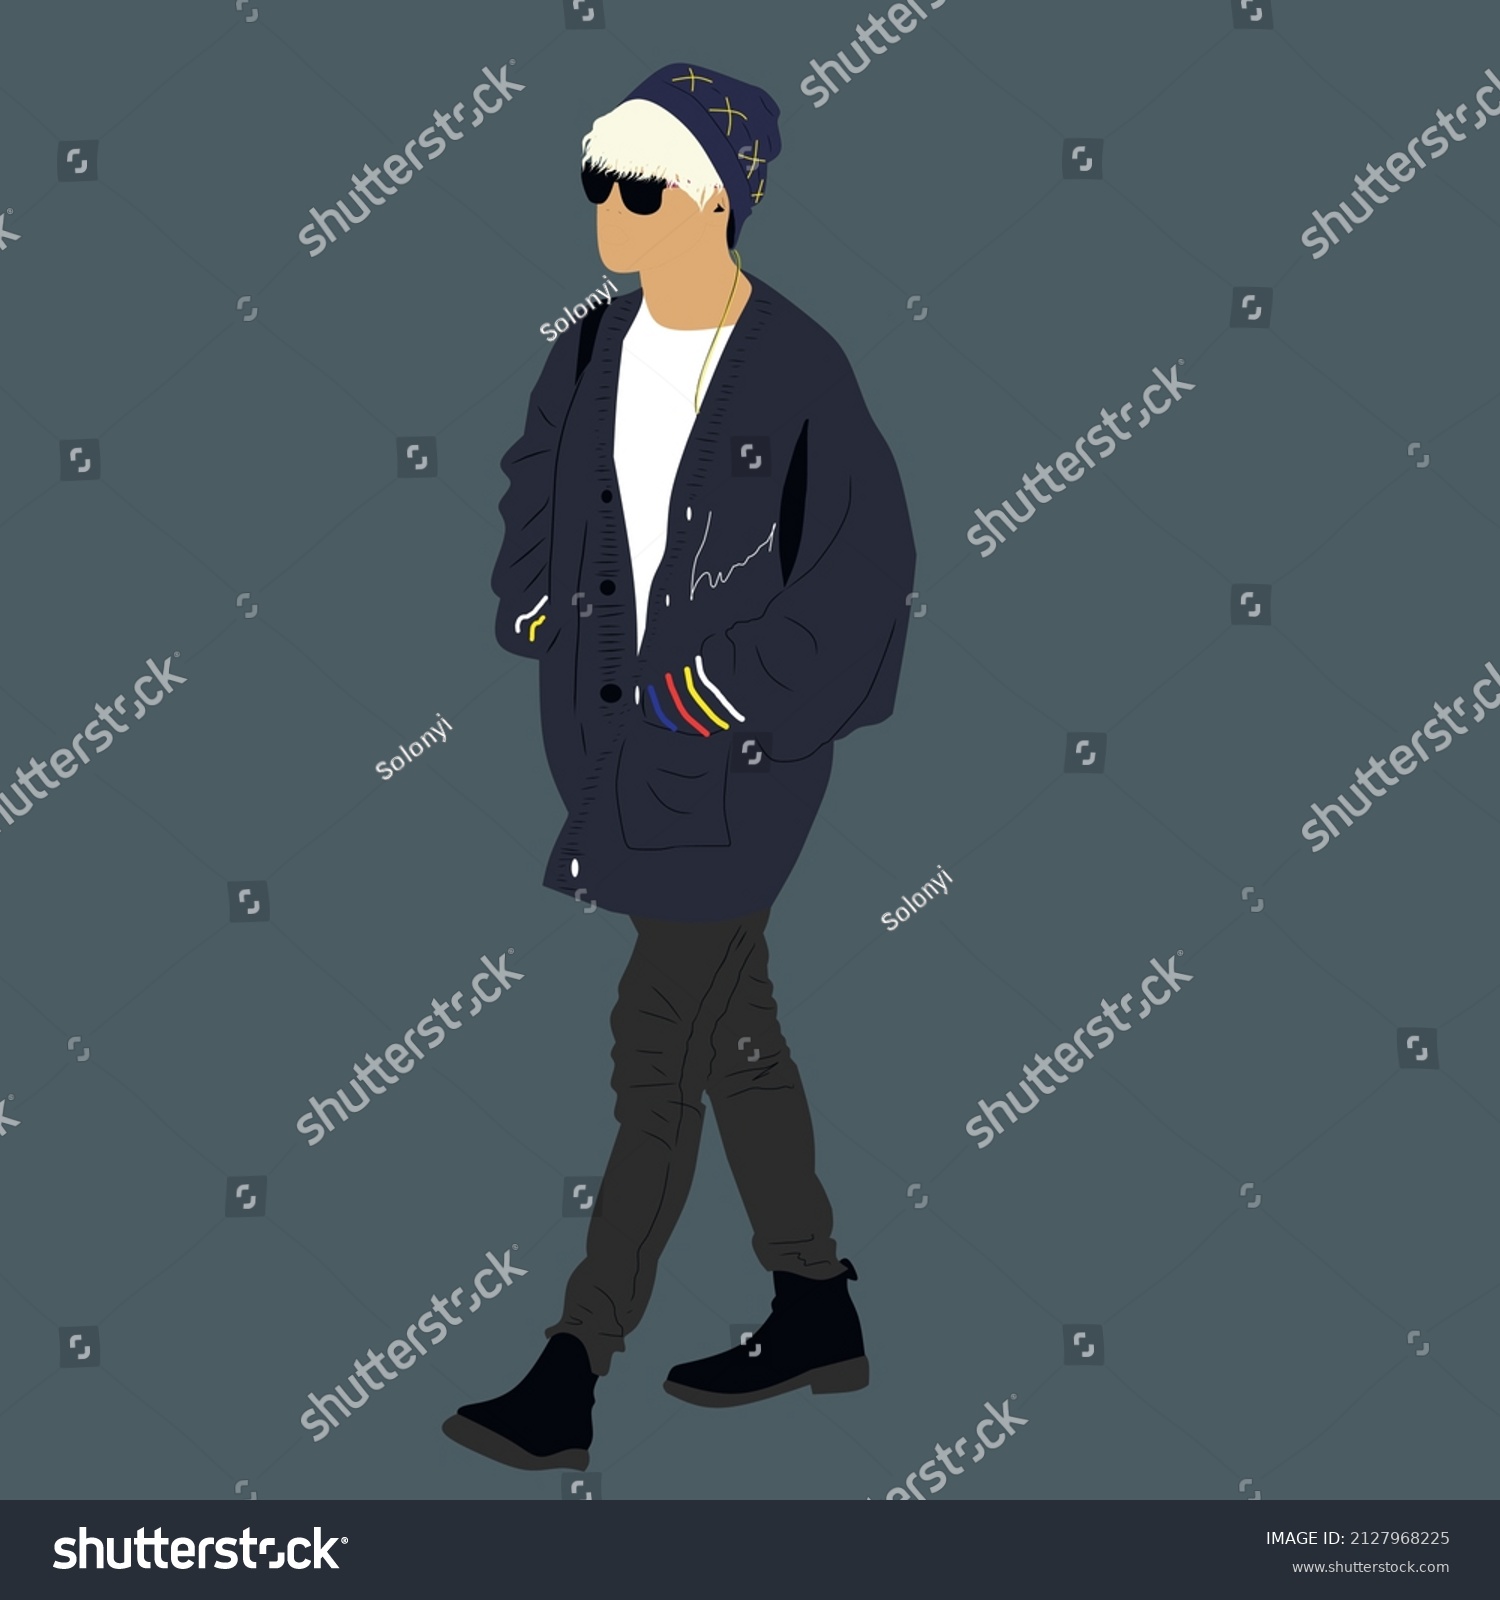 SVG of Vector illustration of Kpop street fashion. Street idols of Koreans. Kpop men's fashion idol. The guy is blond in a blue cardigan and trousers and a blue hat and with black glasses. svg